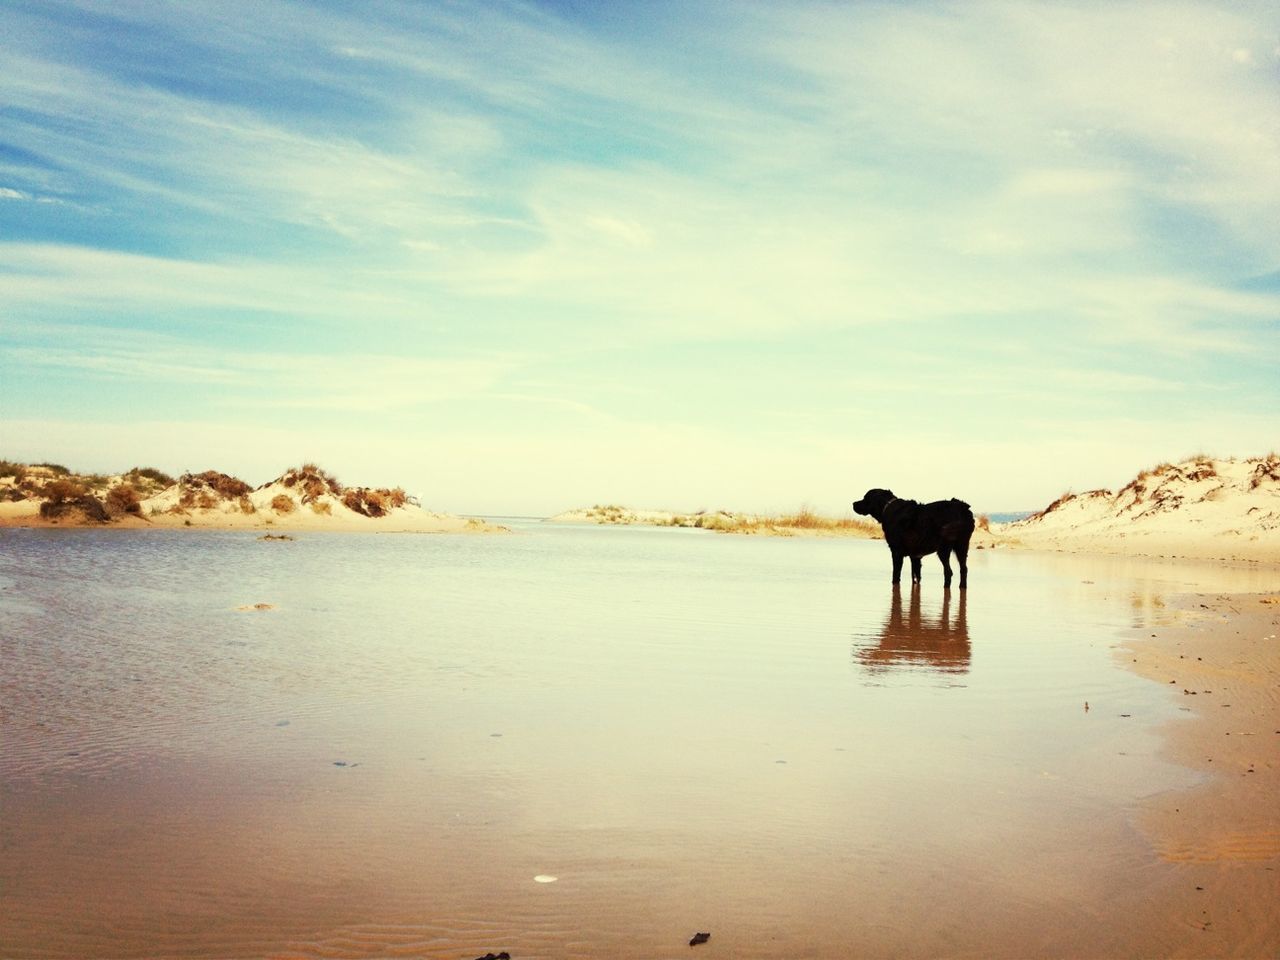 animal themes, domestic animals, water, mammal, dog, one animal, pets, sea, sky, beach, standing, nature, tranquil scene, tranquility, full length, beauty in nature, scenics, walking, shore, horse